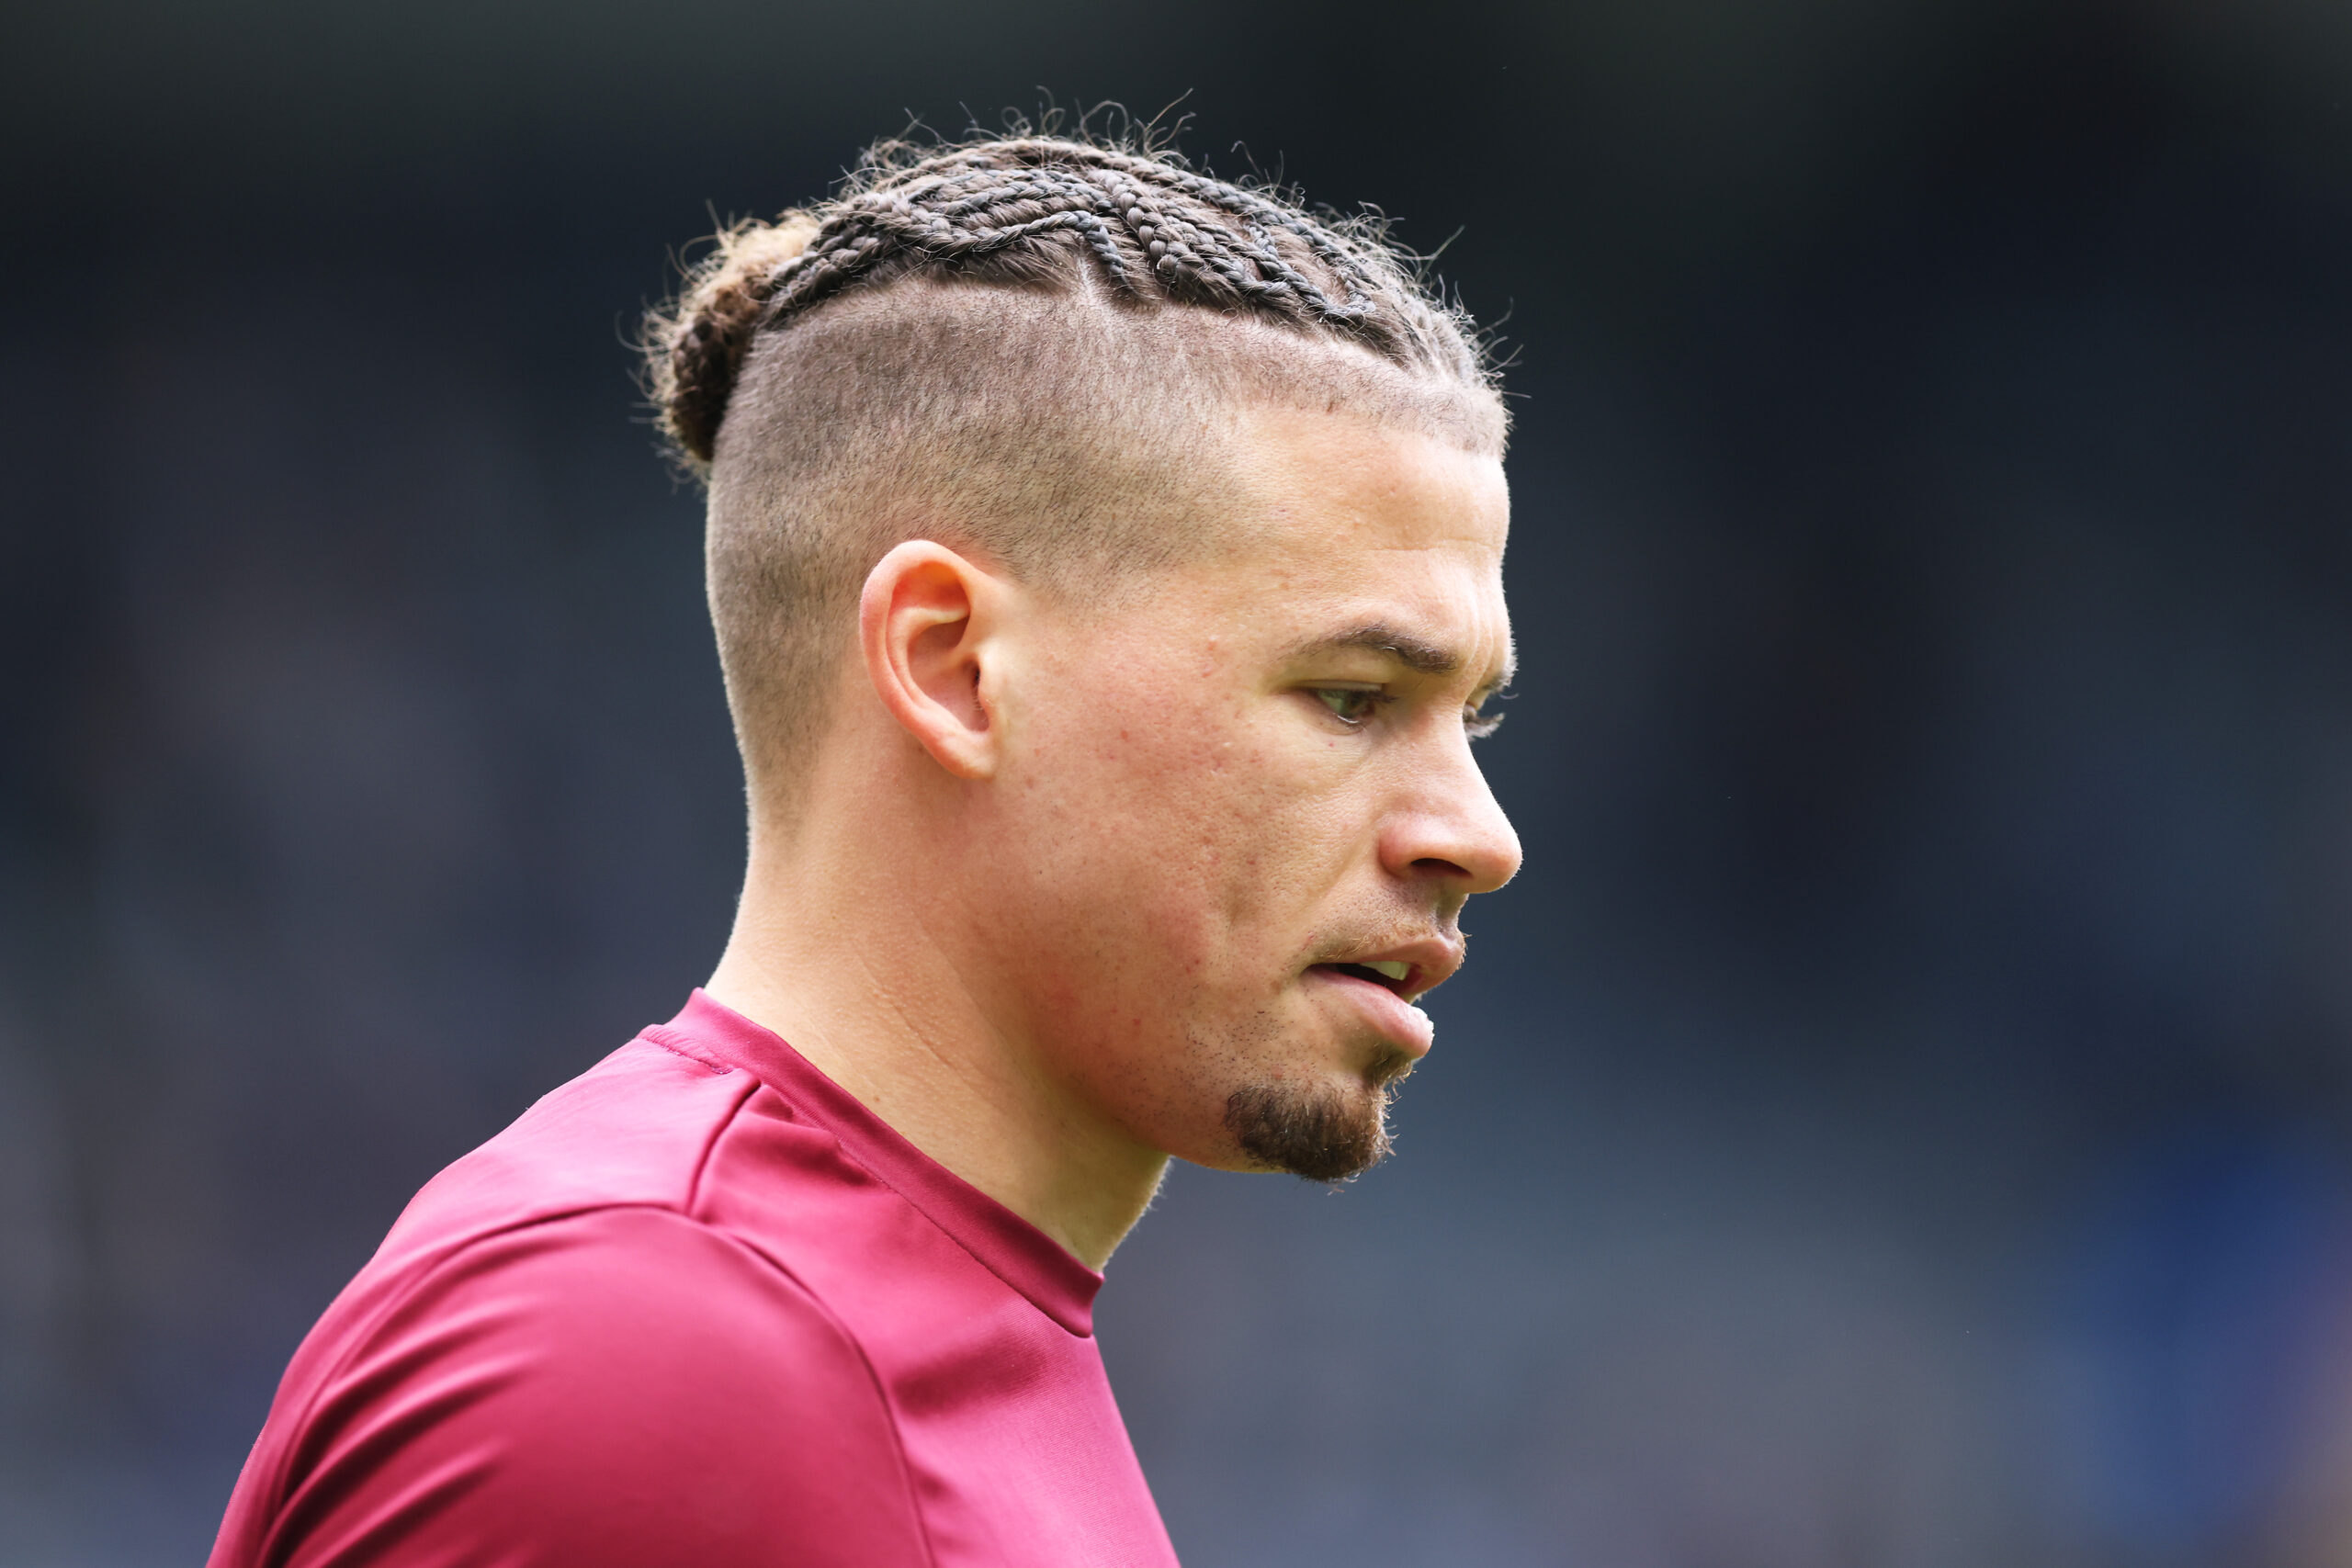 NEWCASTLE UPON TYNE, ENGLAND - MARCH 30: Kalvin Phillips of West Ham United looks on during the warm up prior t the Premier League match between Newcastle United and West Ham United at St. James Park on March 30, 2024 in Newcastle upon Tyne, England.